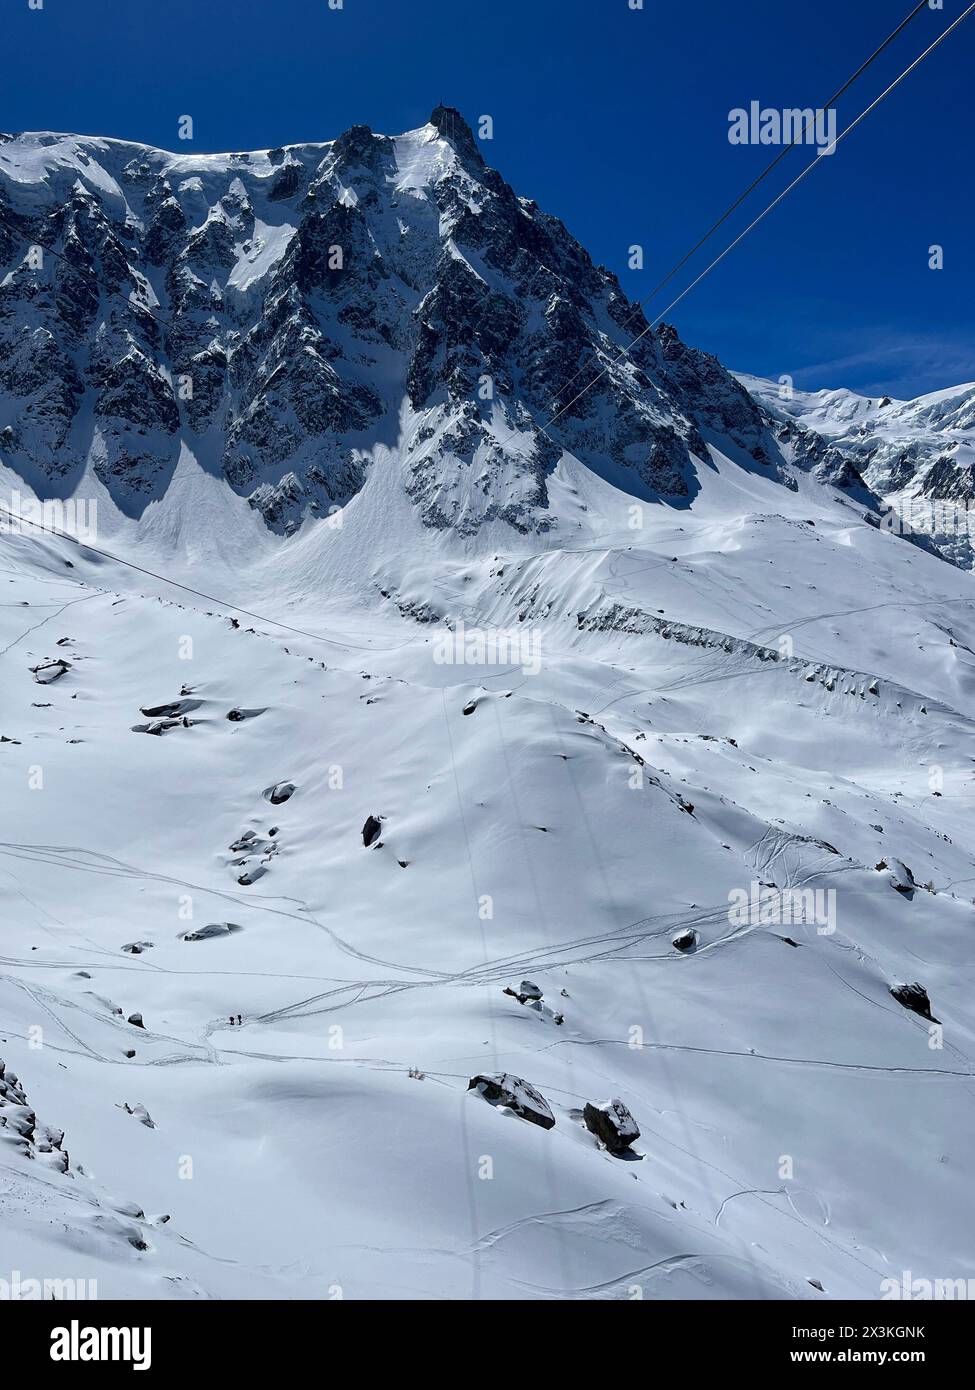 Chamonix, Haute-Savoie, France: panoramic view from the station of the cable car of L’Aiguille du Midi, the highest spire in the Mont Blanc massif Stock Photo